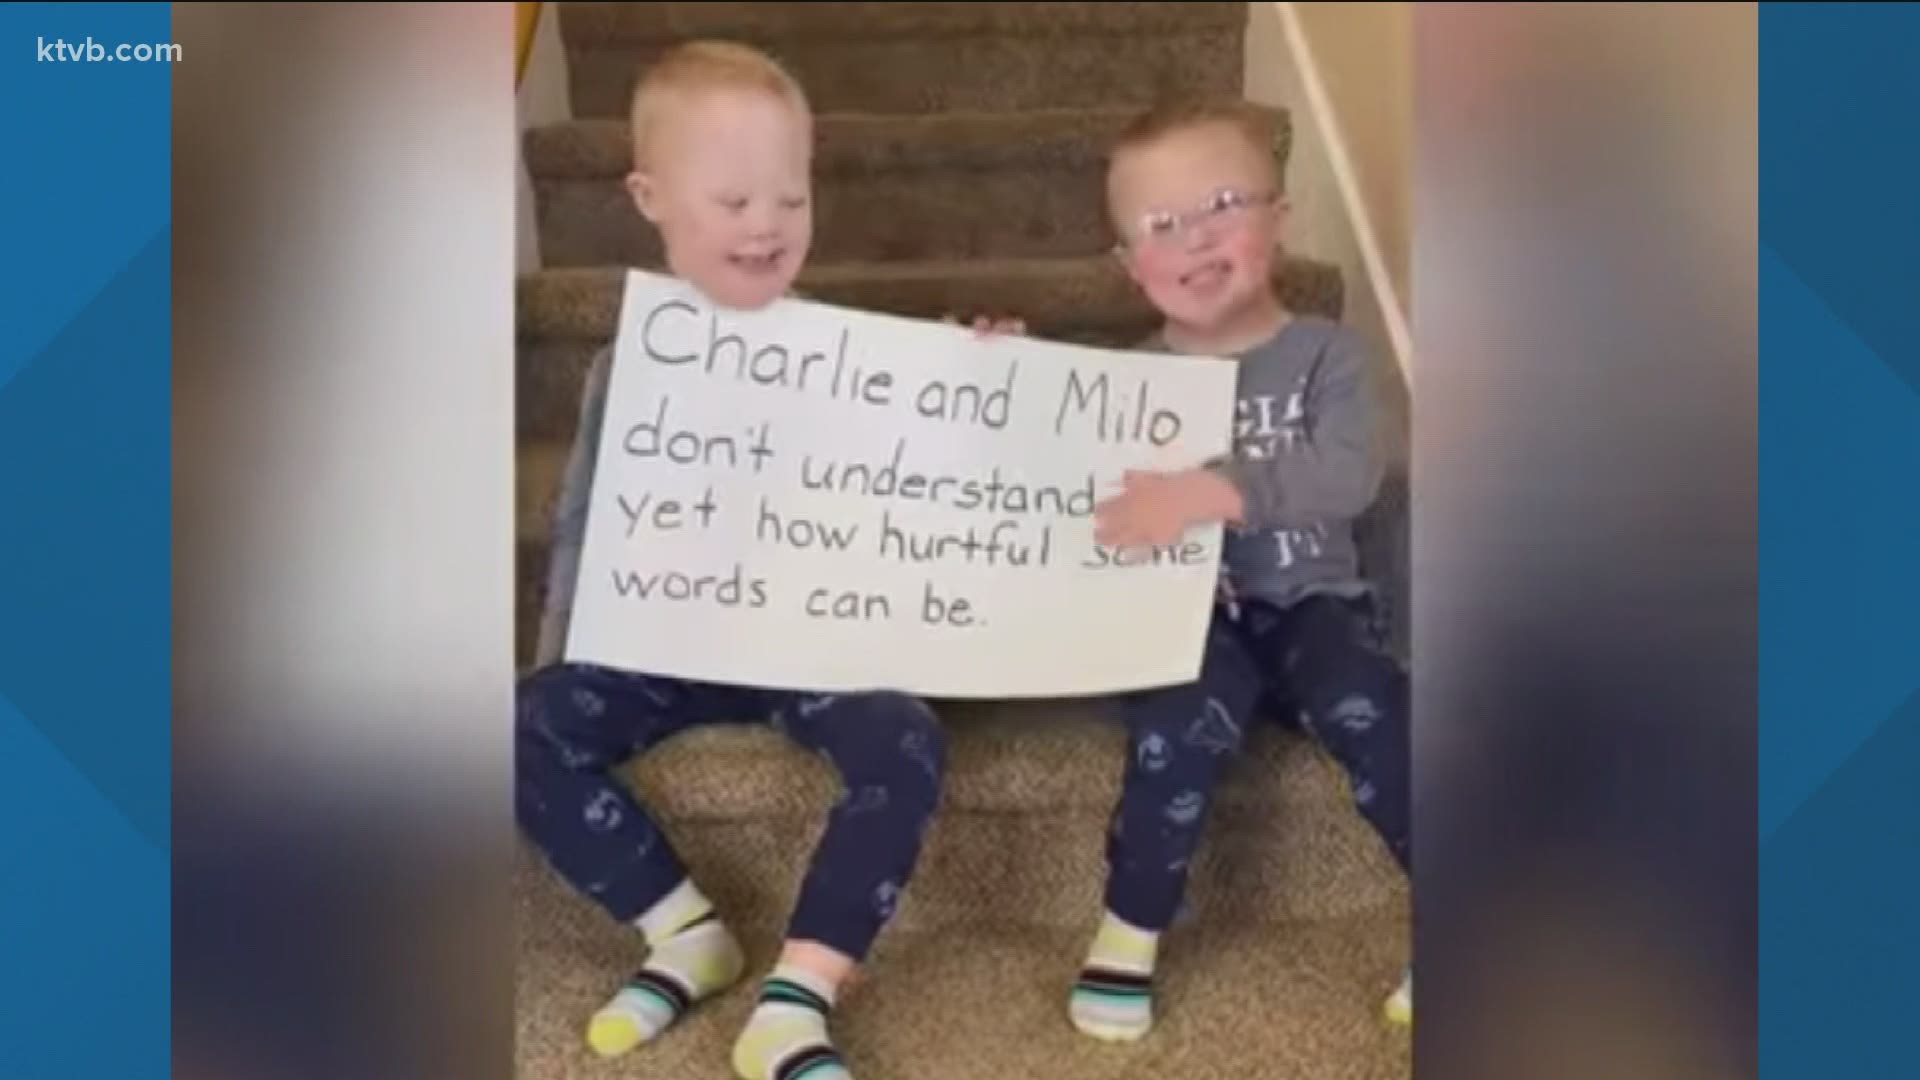 Charlie and Milo McConnel are already social media stars. Their mom hopes their popularity will spread acceptance and inclusion, and end the use of hurtful words.